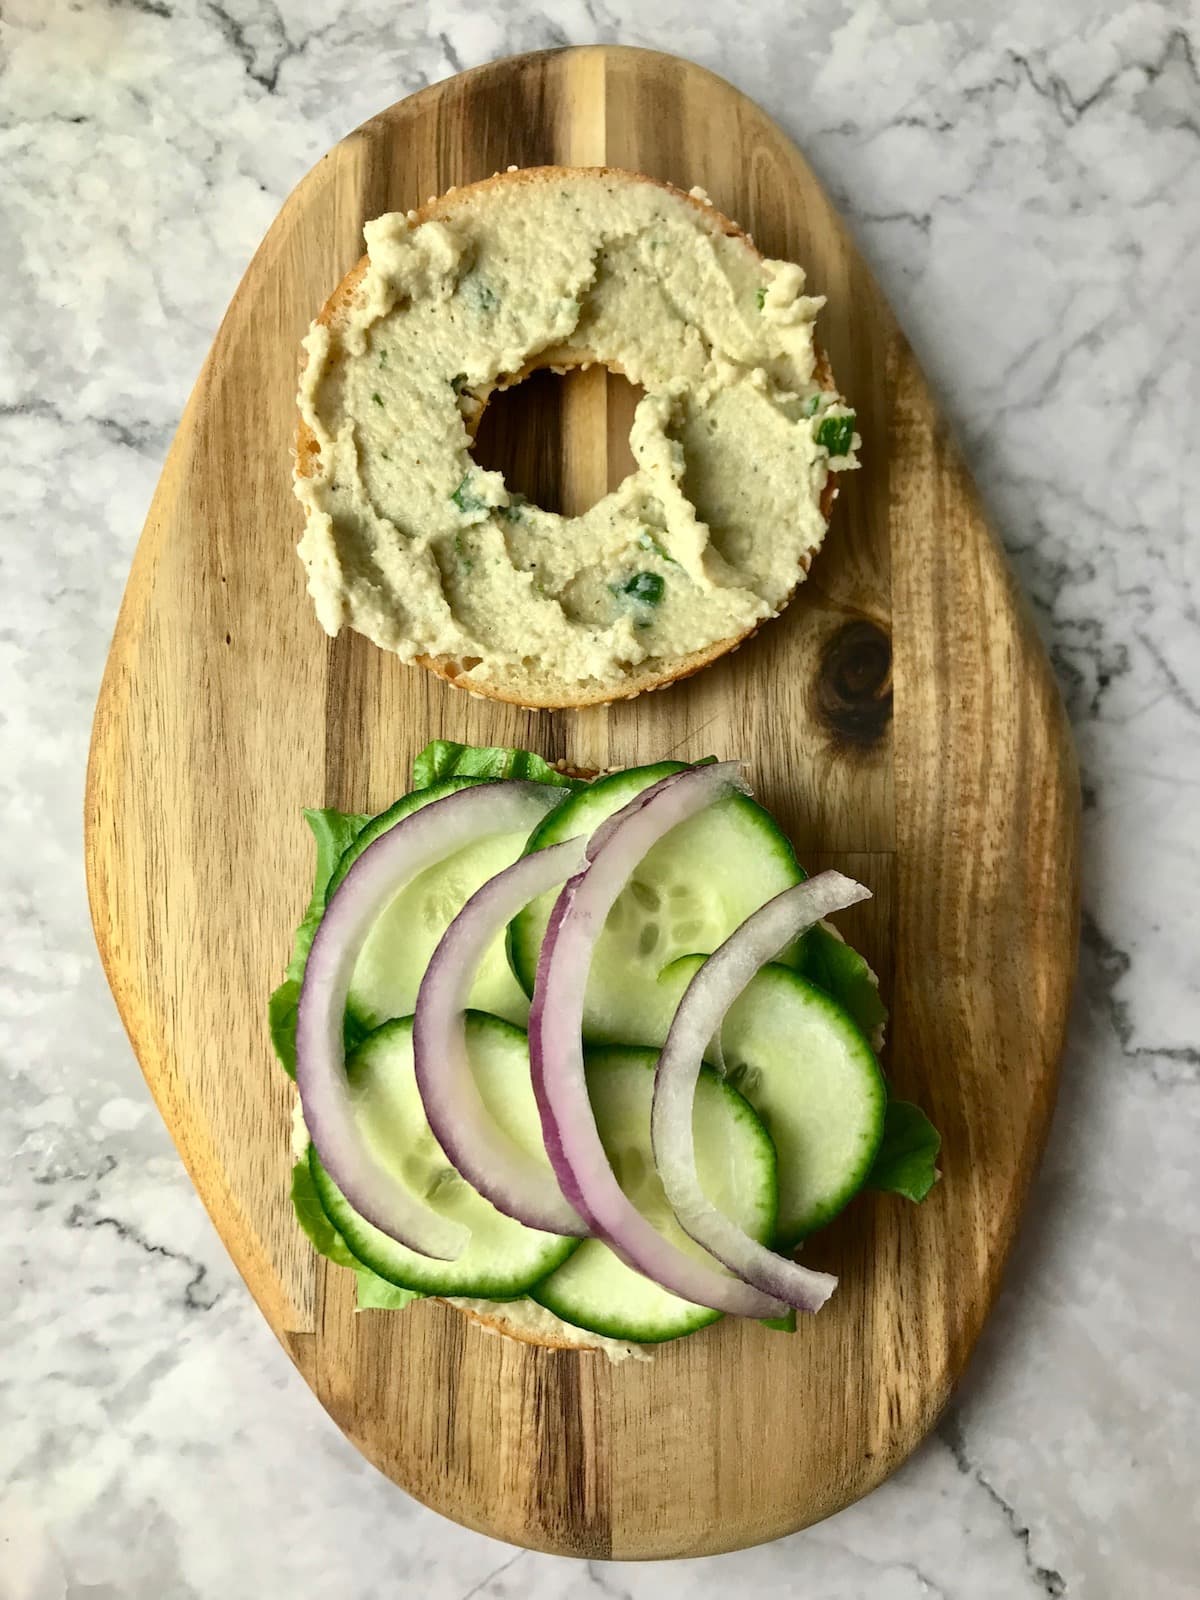 A bagel slice topped with cream cheese and another slice topped with lettuce, cucumber, and onion.